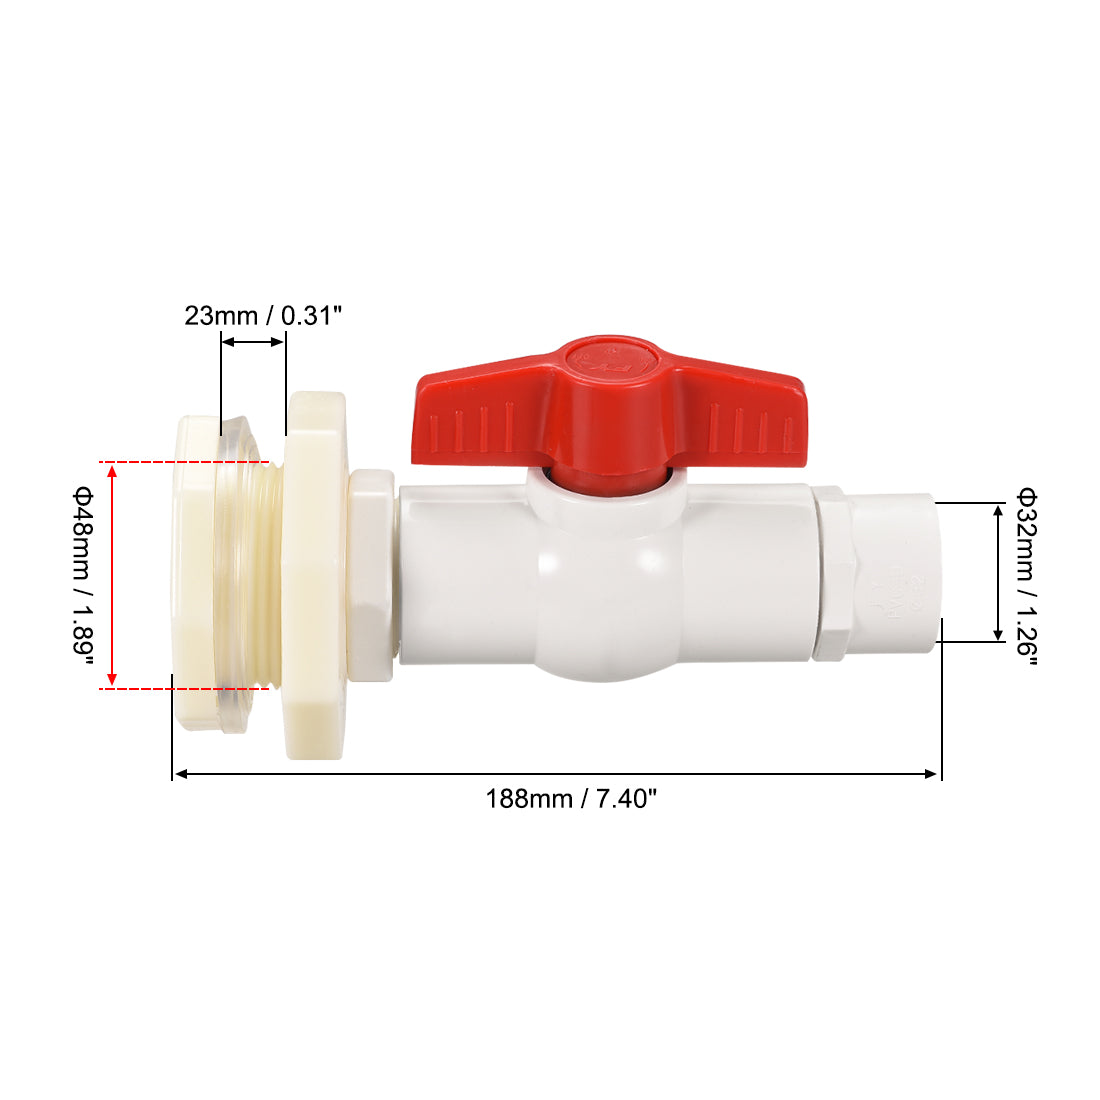 uxcell Uxcell PVC Ball Valve Connector Spigot Kit, with Bulkhead Fitting Adapter, White Red for Water Tank